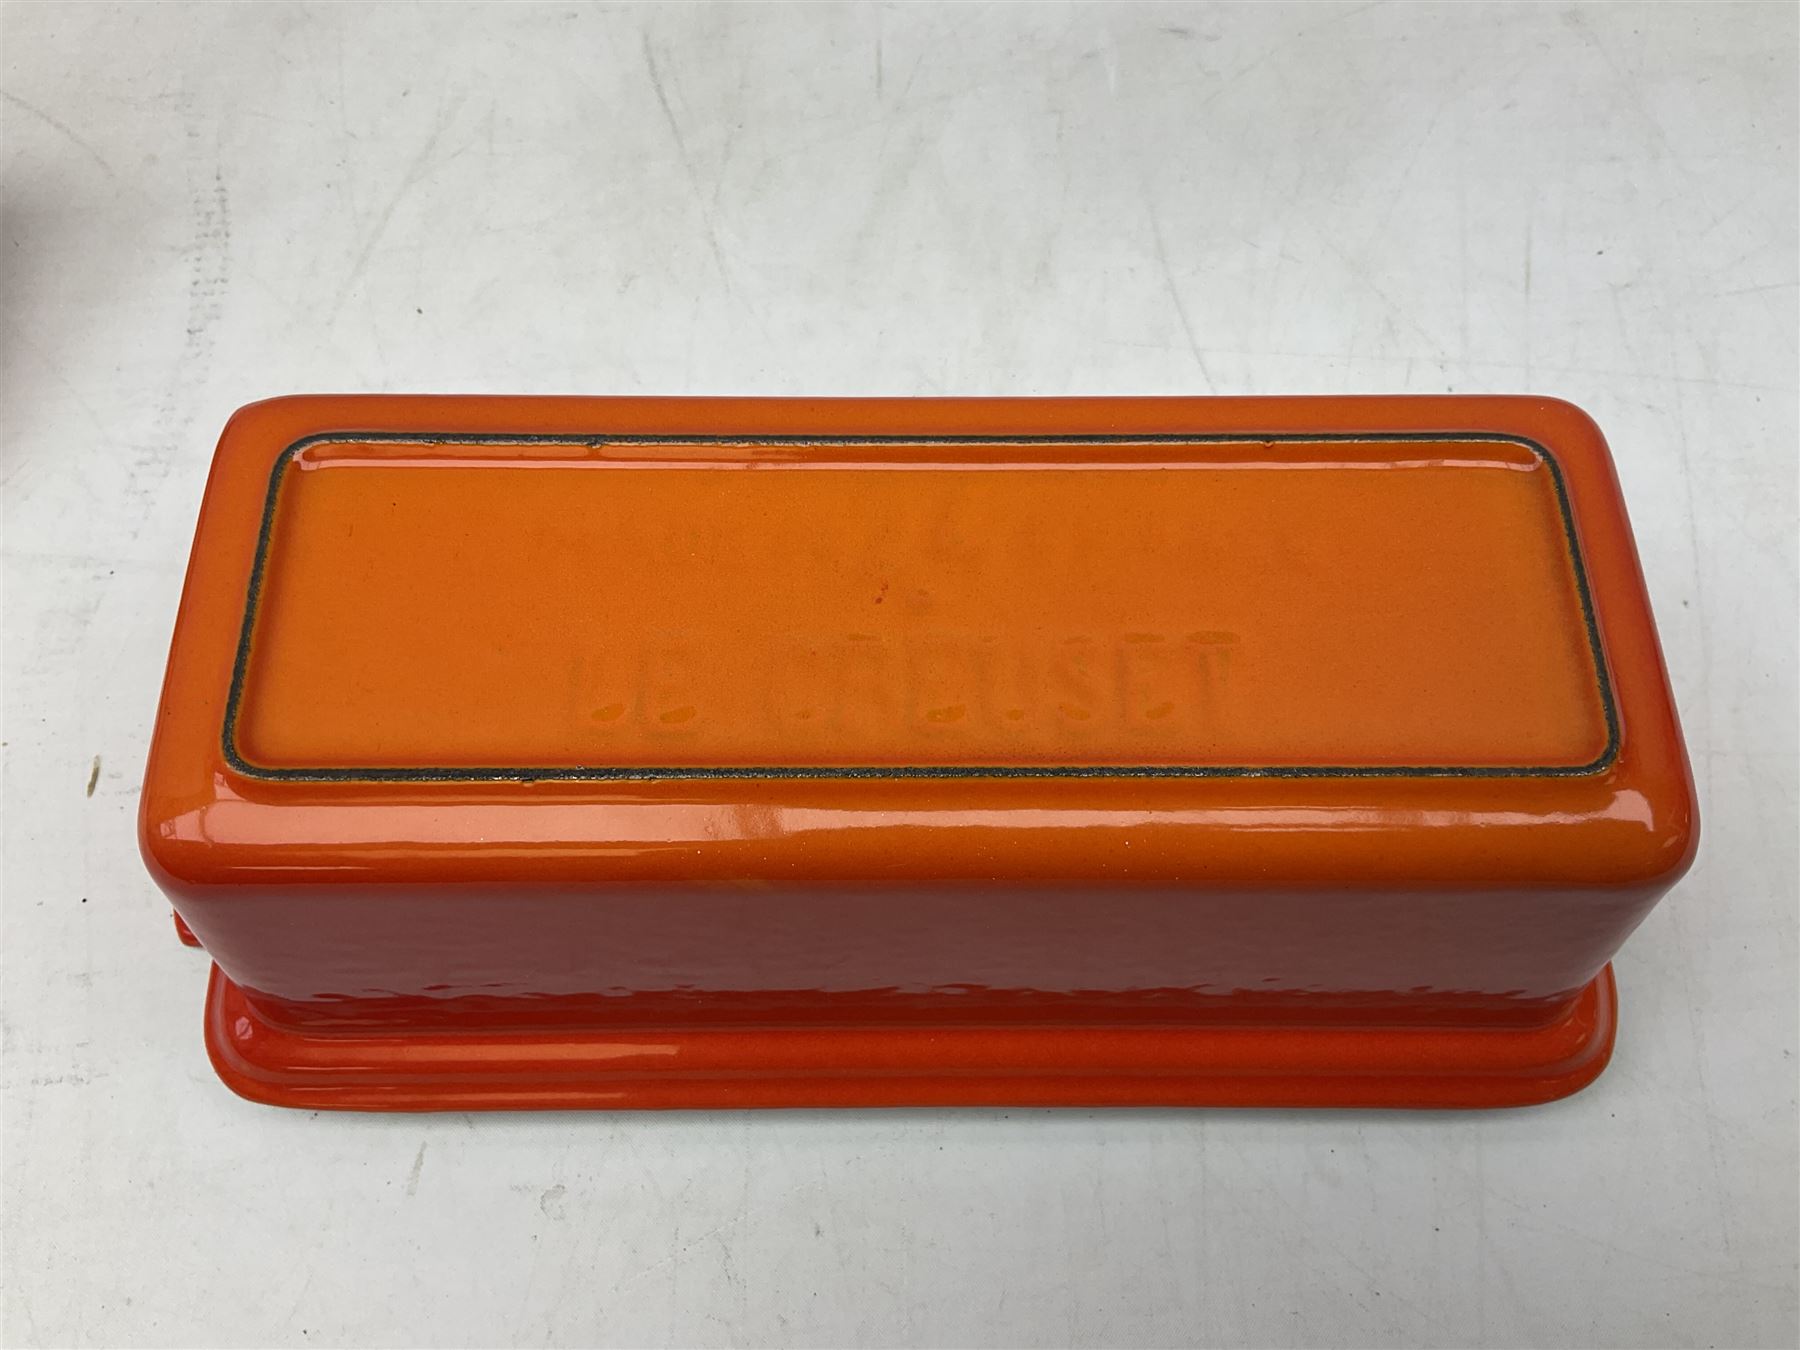 Le Creuset cast iron and enamel lidded tureen in the orange colourway - Image 6 of 6